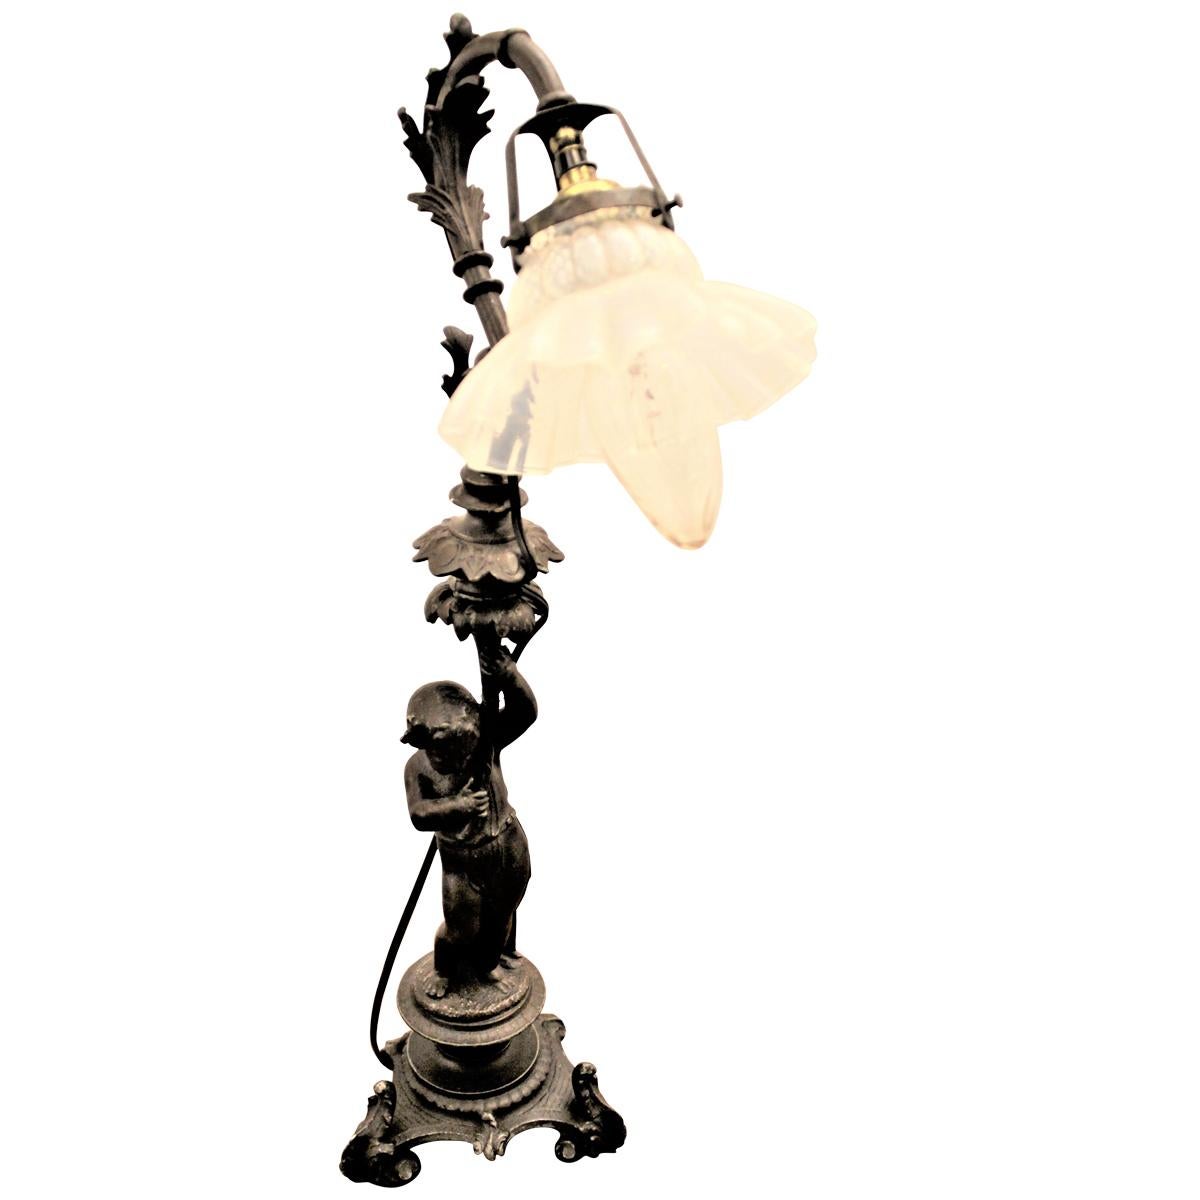 Antique Cast Figural Cherub Table Lamp with a Ruffled Opalescent Shade